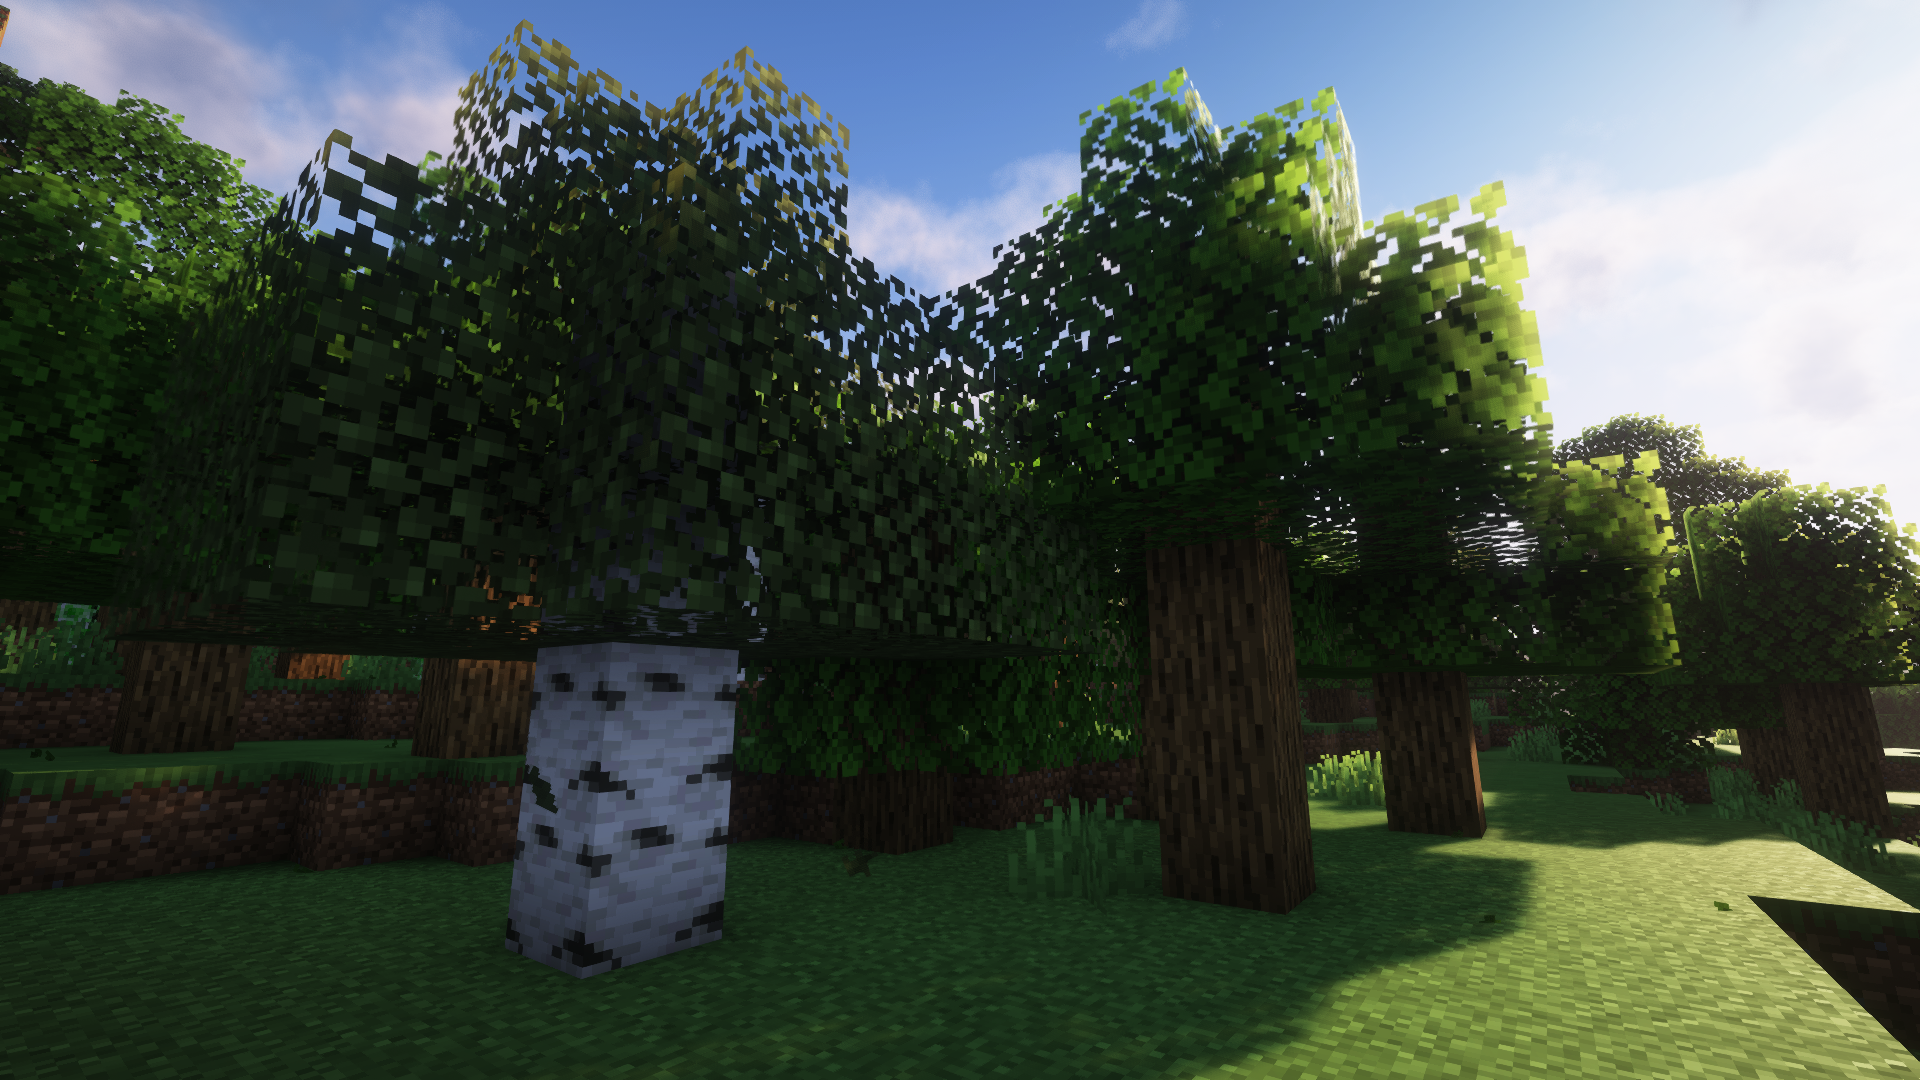 Falling Leaves mod with shaders! 
-Complementary Shaders